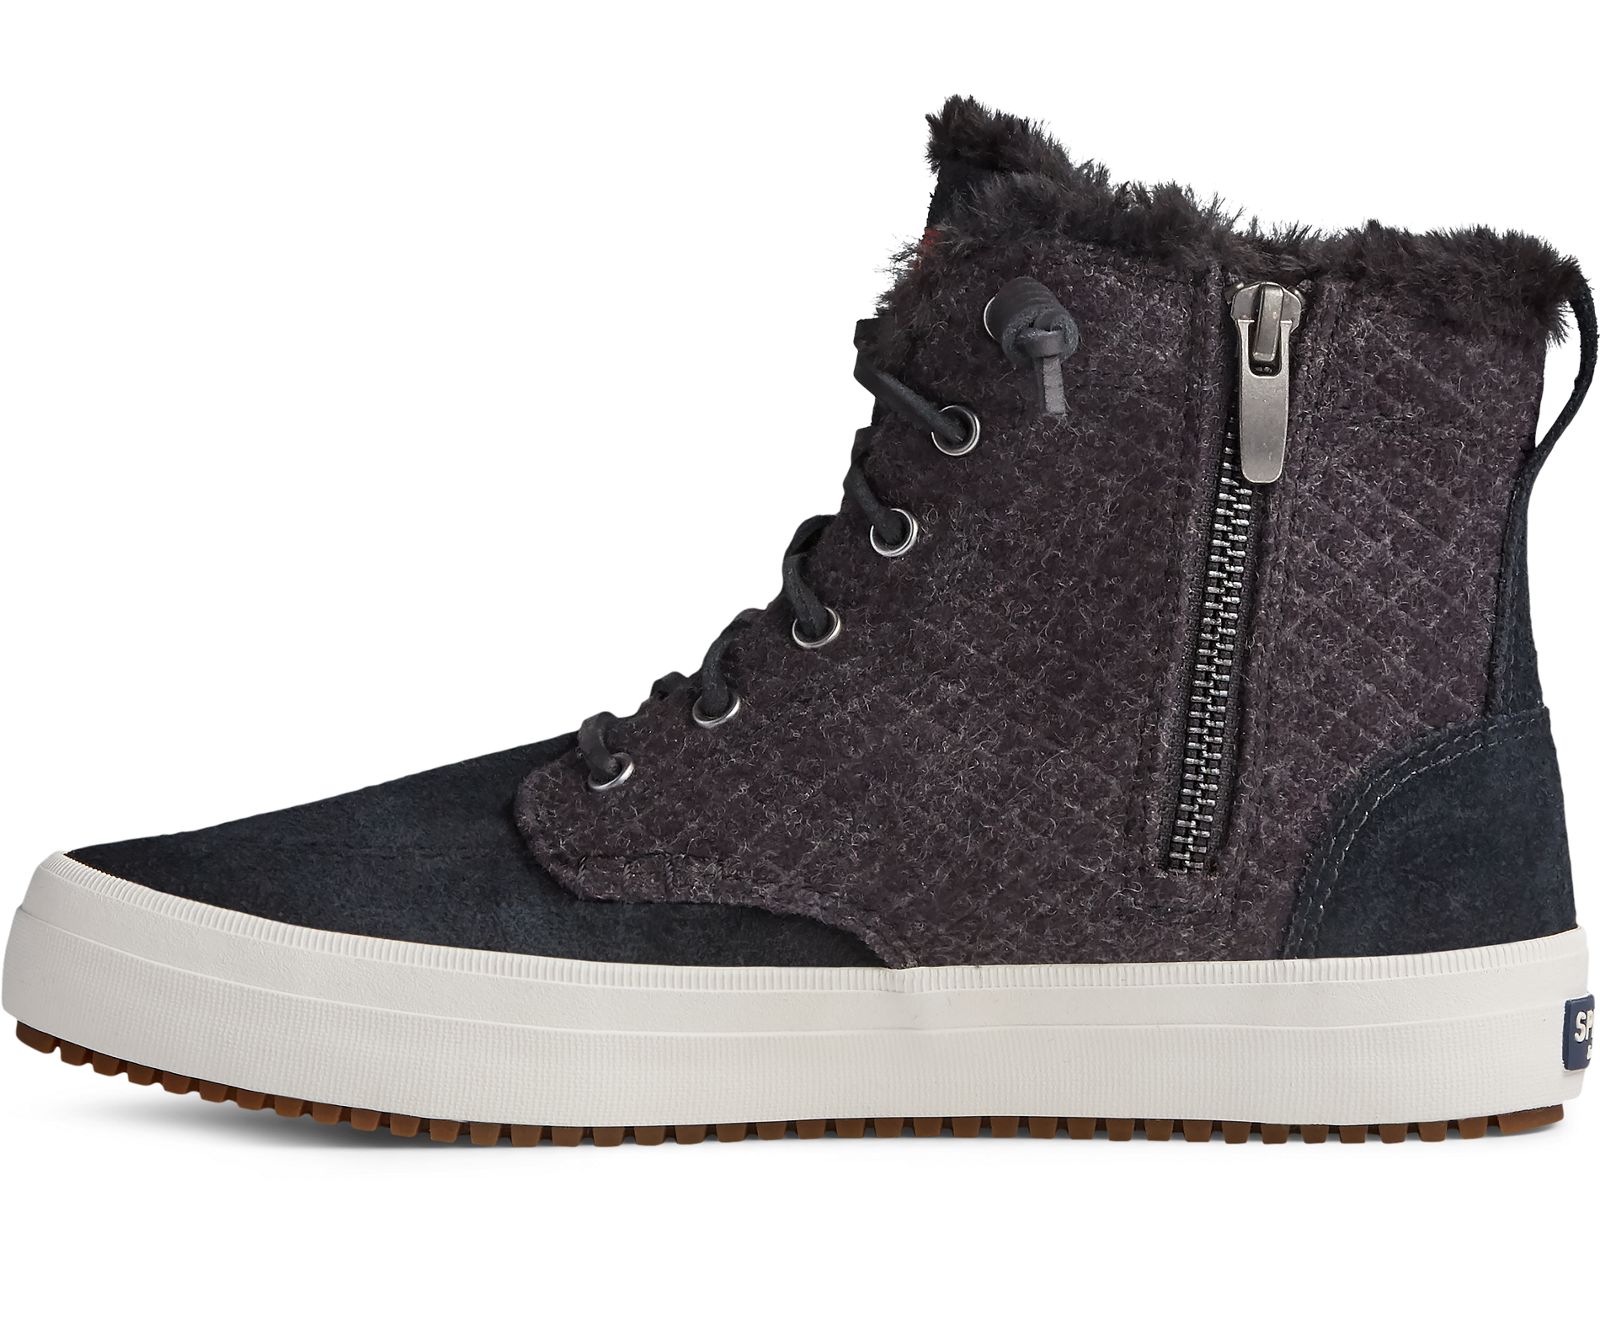 Women's Crest Lug High Top Quilted Suede Boot - Boots | Sperry